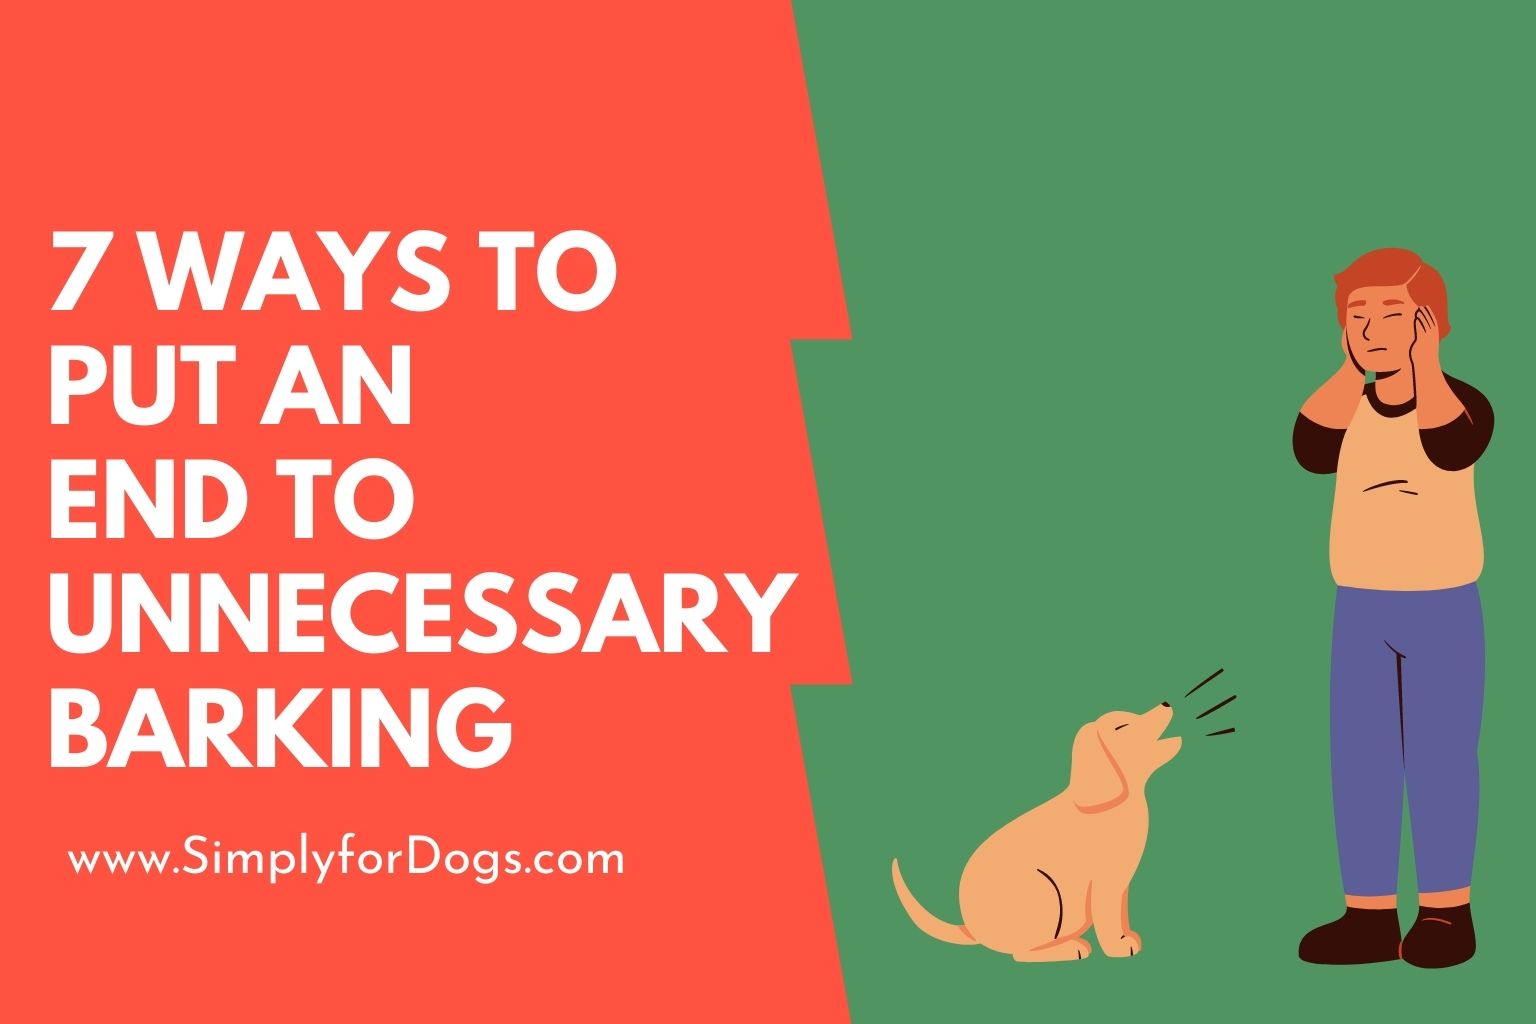 7 Ways to Put an End to Unnecessary Barking